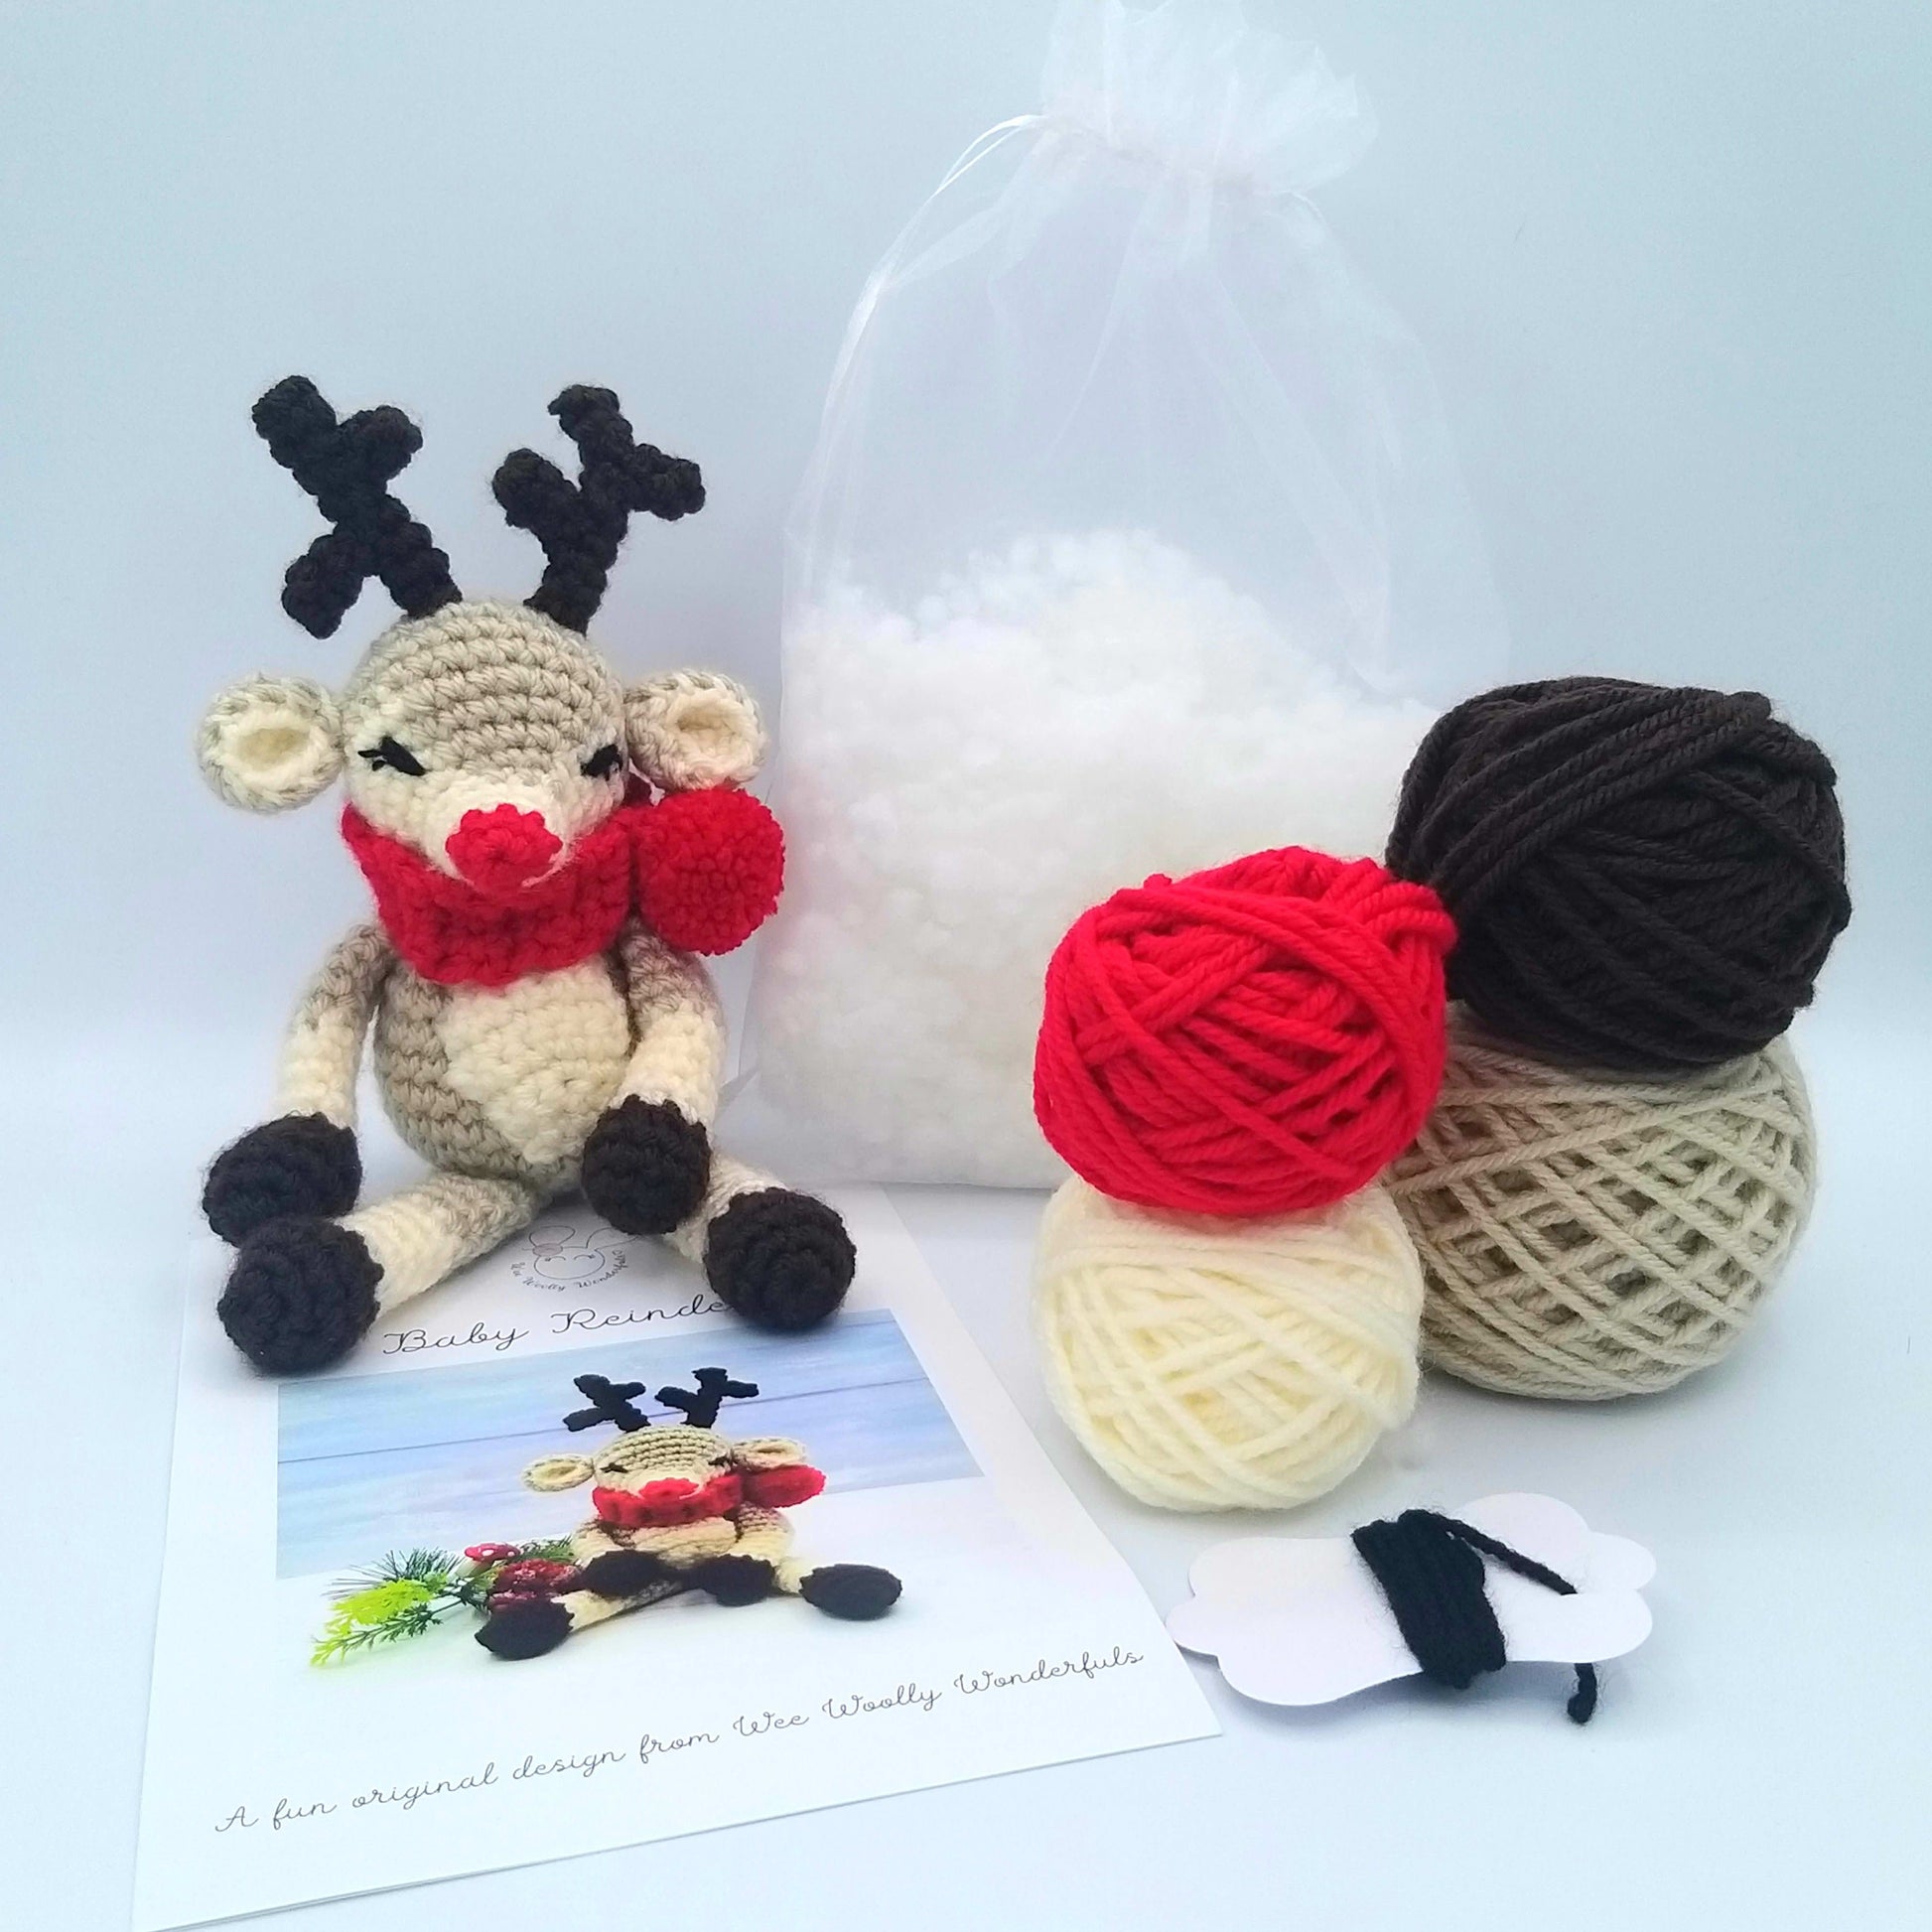 Crochet Reindeer with yarn, stuffing and pattern